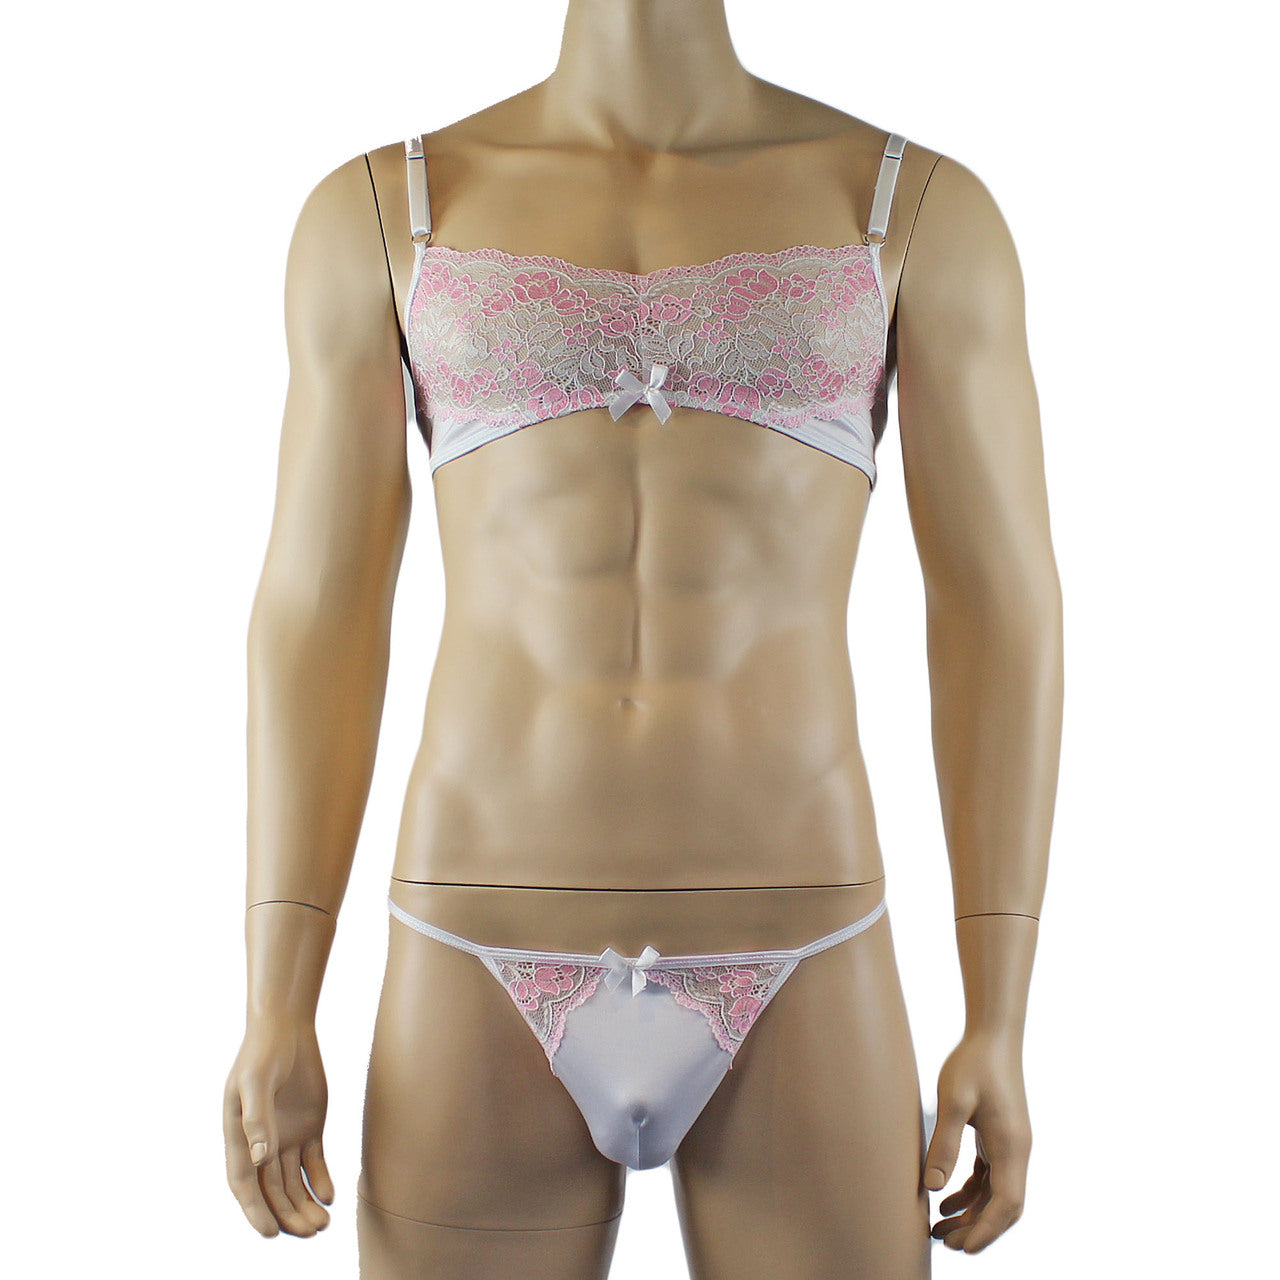 Mens Luxury Spandex & Lace Bra Top and G string White